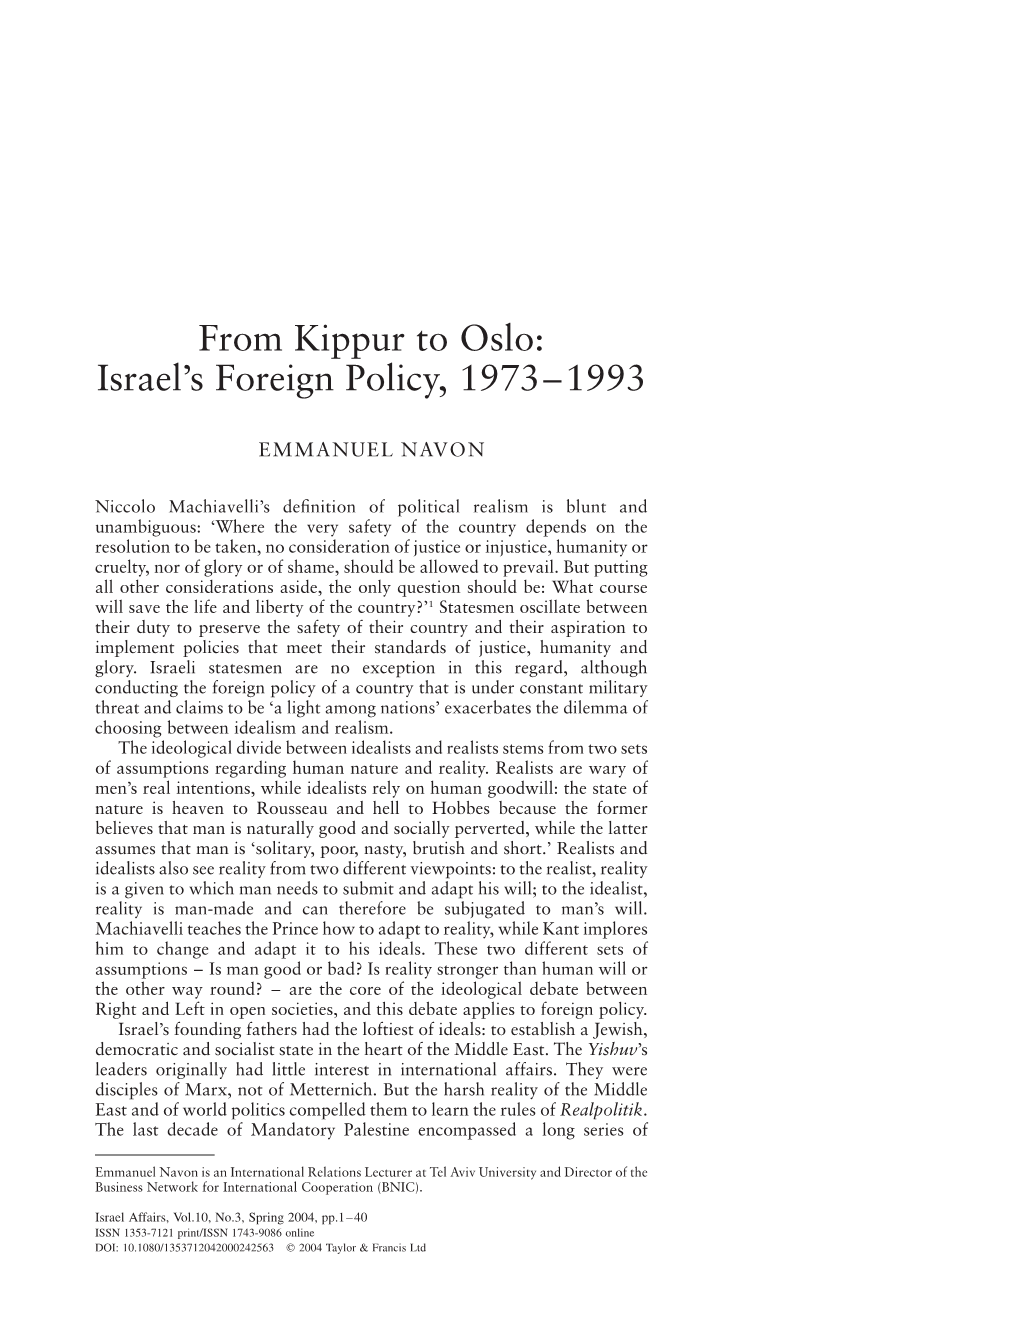 From Kippur to Oslo: Israel’S Foreign Policy, 1973–1993